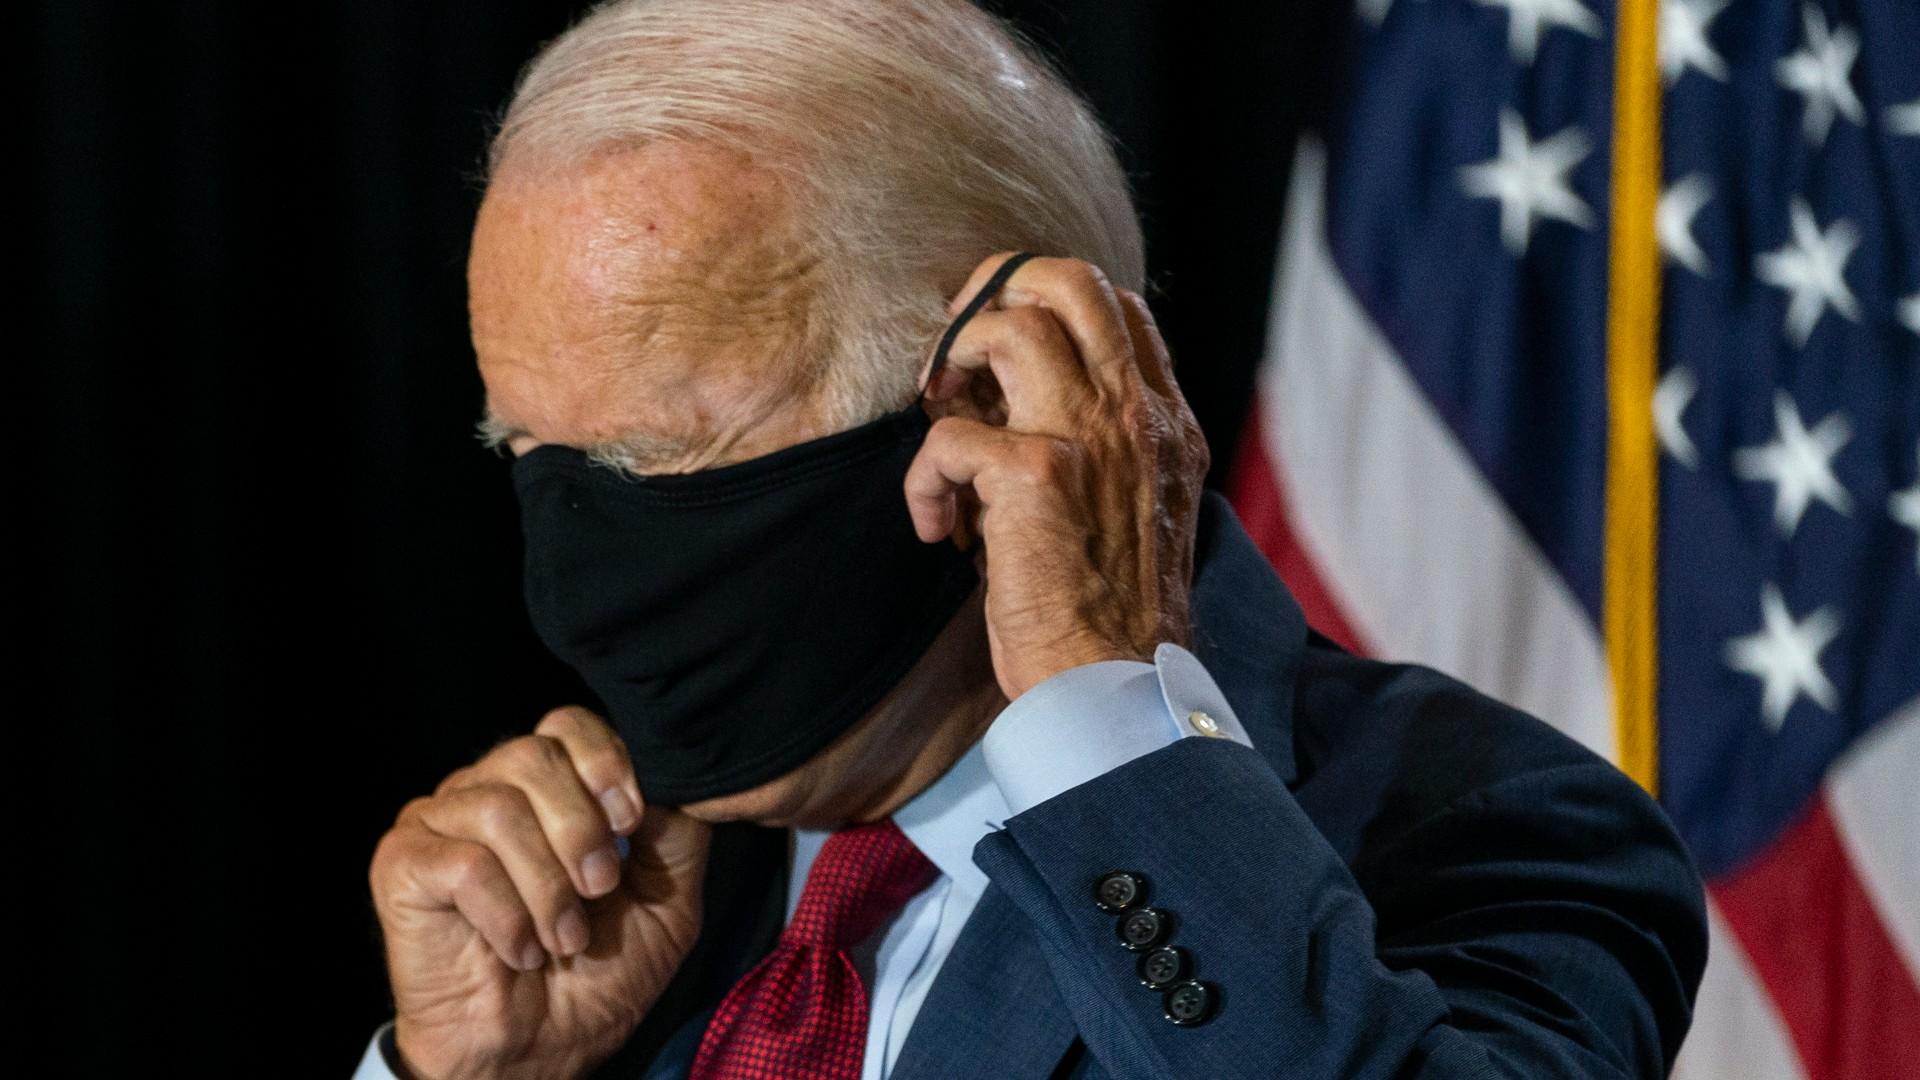 Democratic presidential candidate former Vice President Joe Biden joined by his running mate Sen. Kamala Harris, D-Calif., replaces his face mask after speaking at the Hotel DuPont in Wilmington, Del., Thursday, Aug. 13, 2020. (AP Photo / Carolyn Kaster)